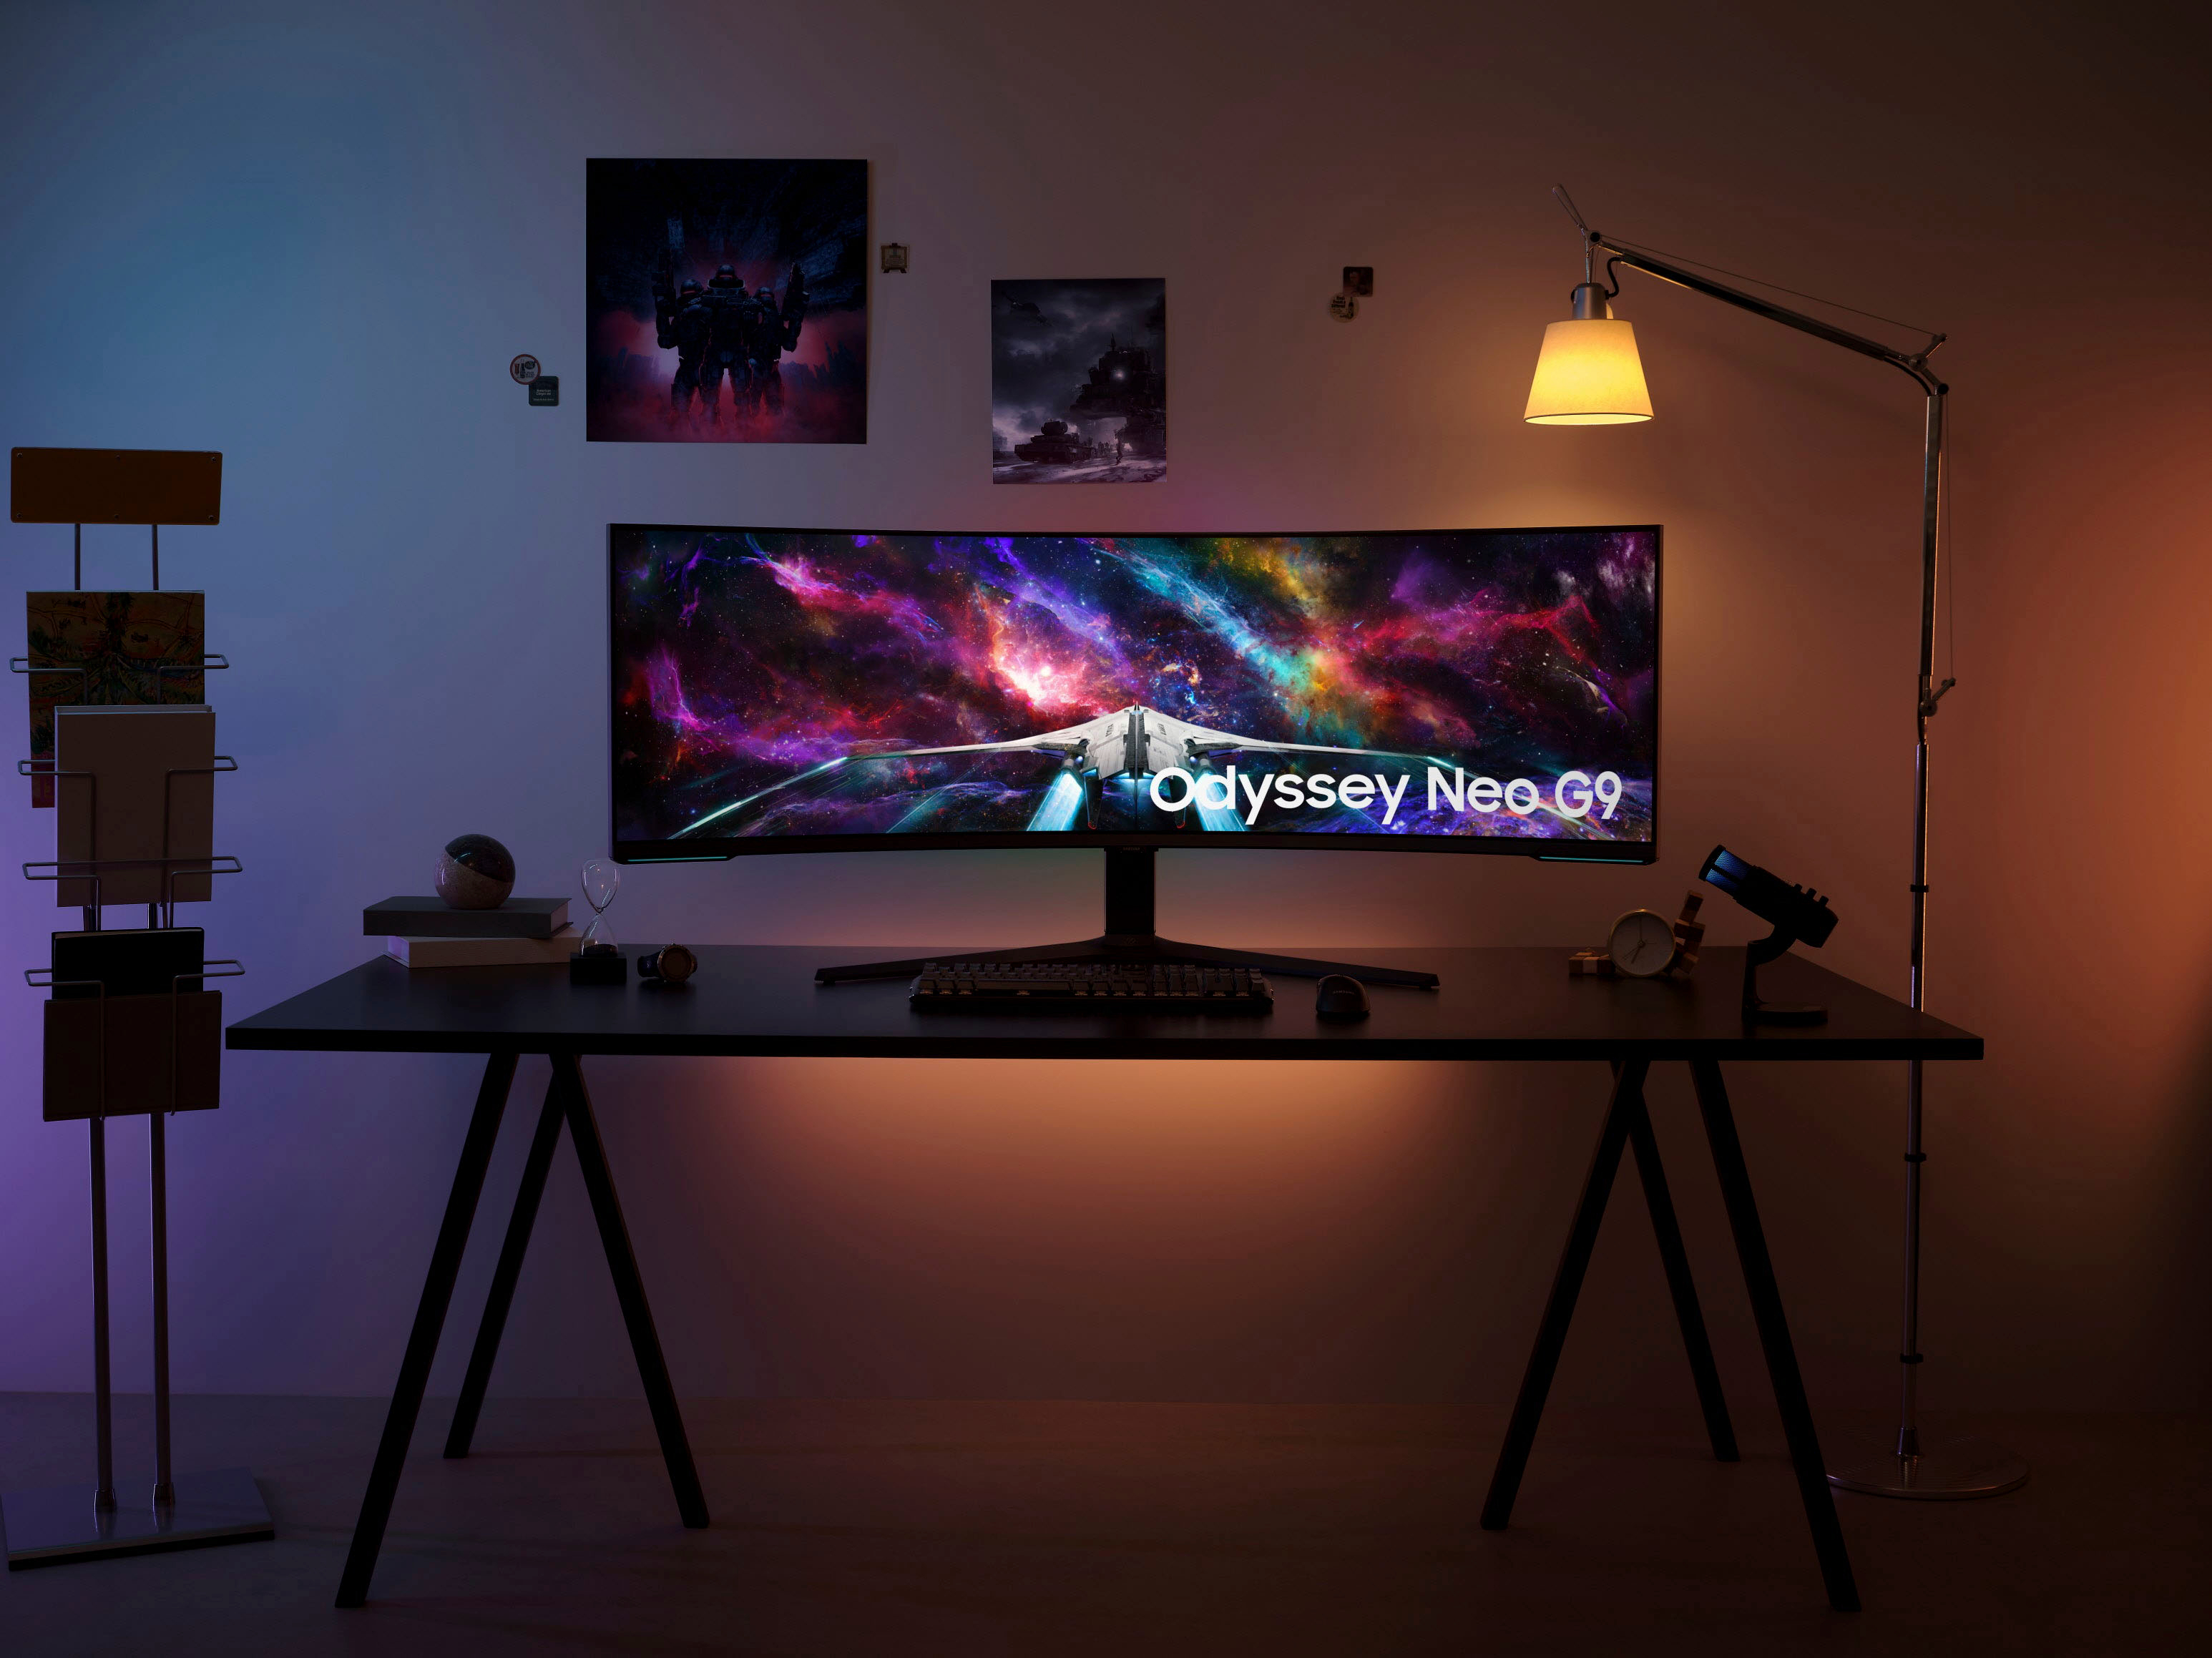 57 Odyssey Neo G9 Dual 4K UHD Quantum Mini-LED 240Hz 1ms(GtG) HDR 1000  Curved Gaming Monitor